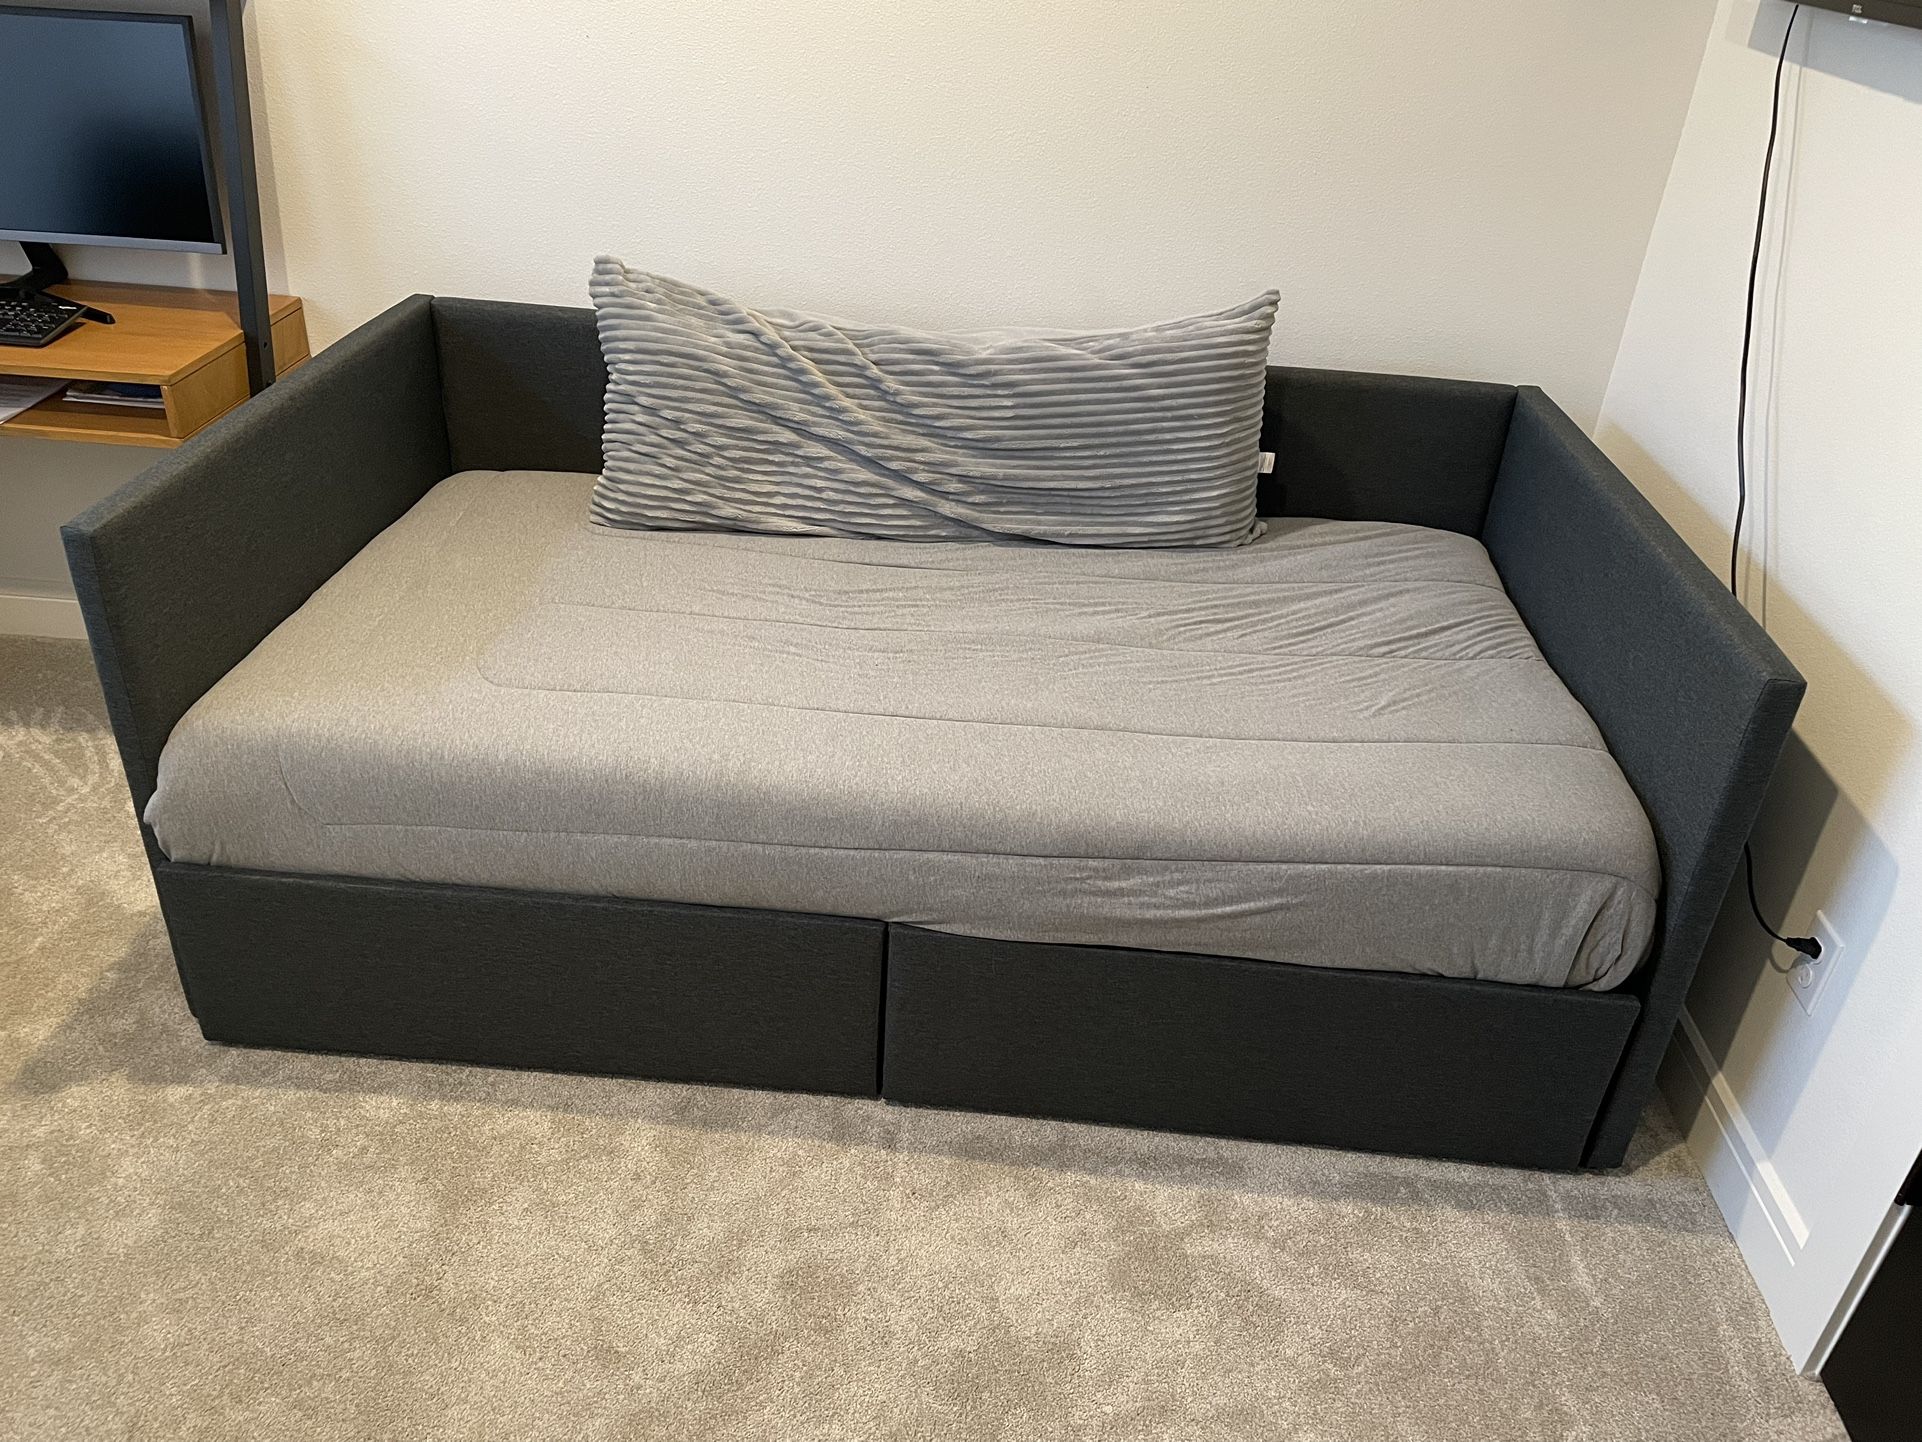 Twin Upholstered Daybed